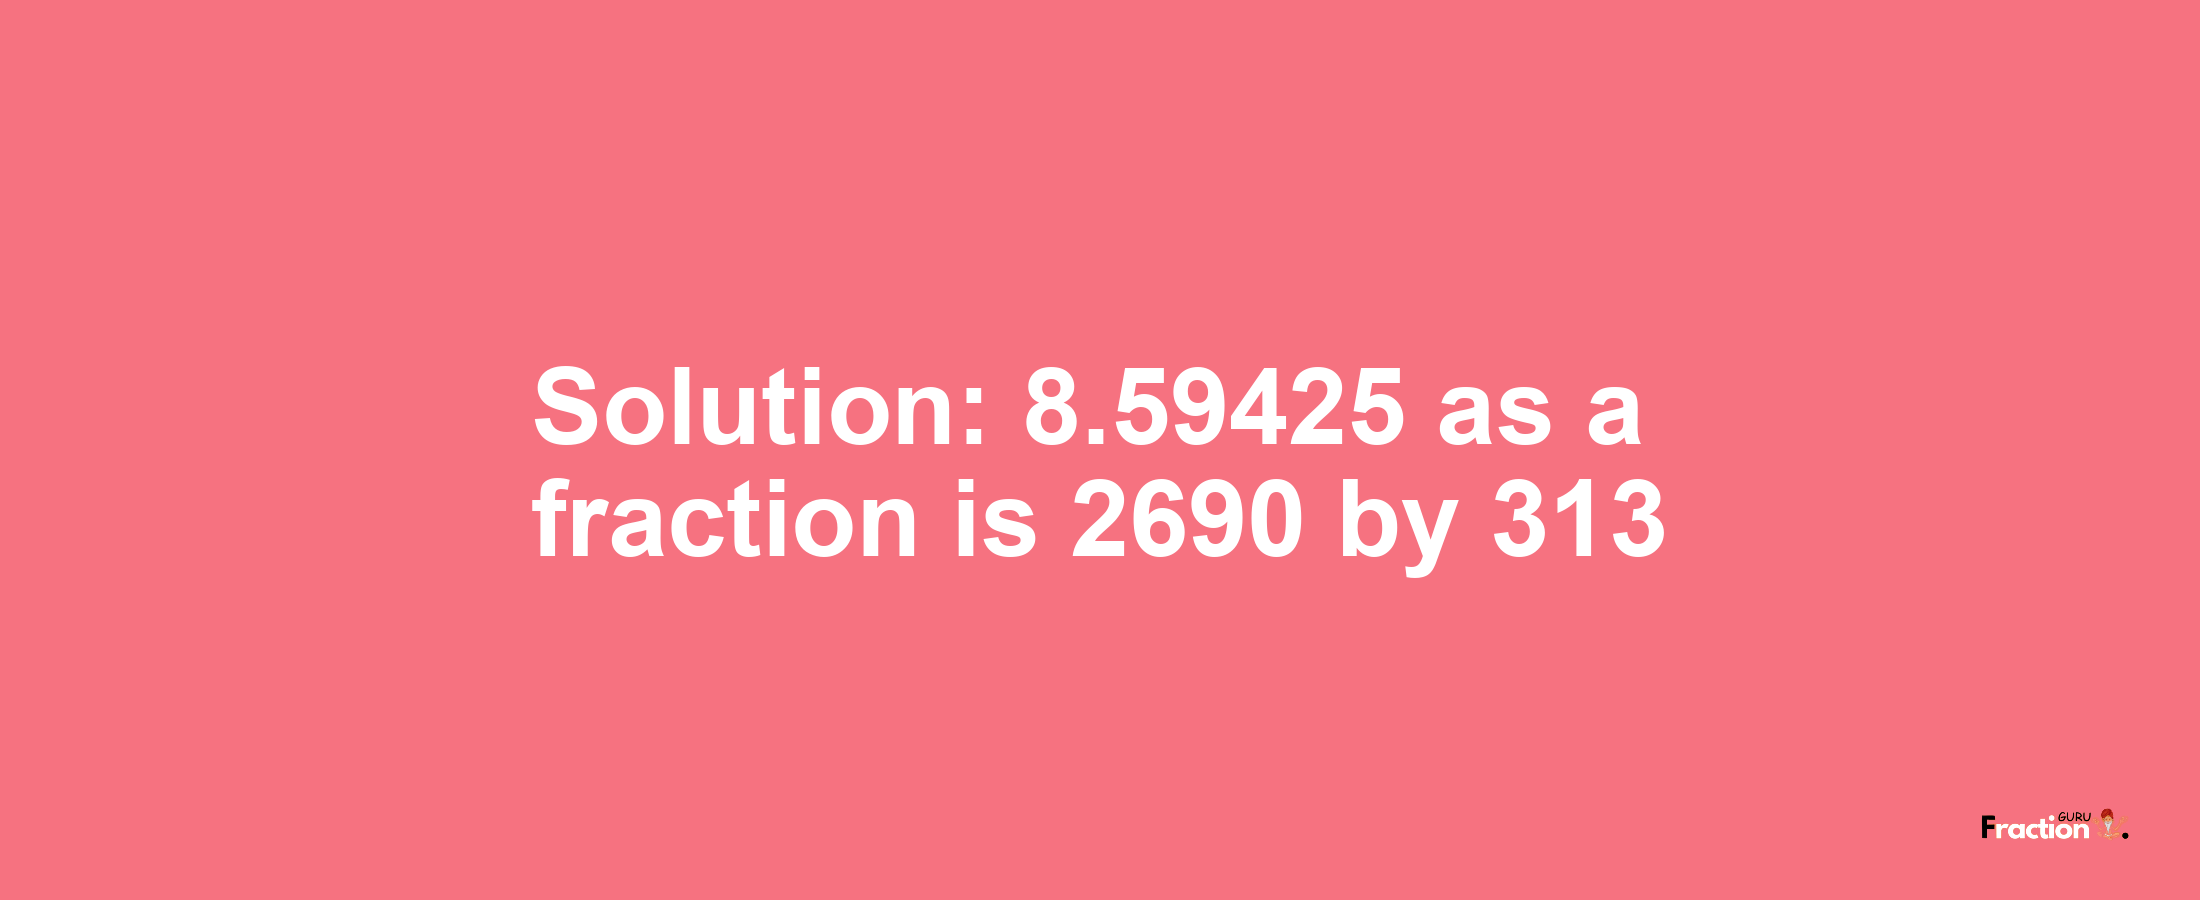 Solution:8.59425 as a fraction is 2690/313